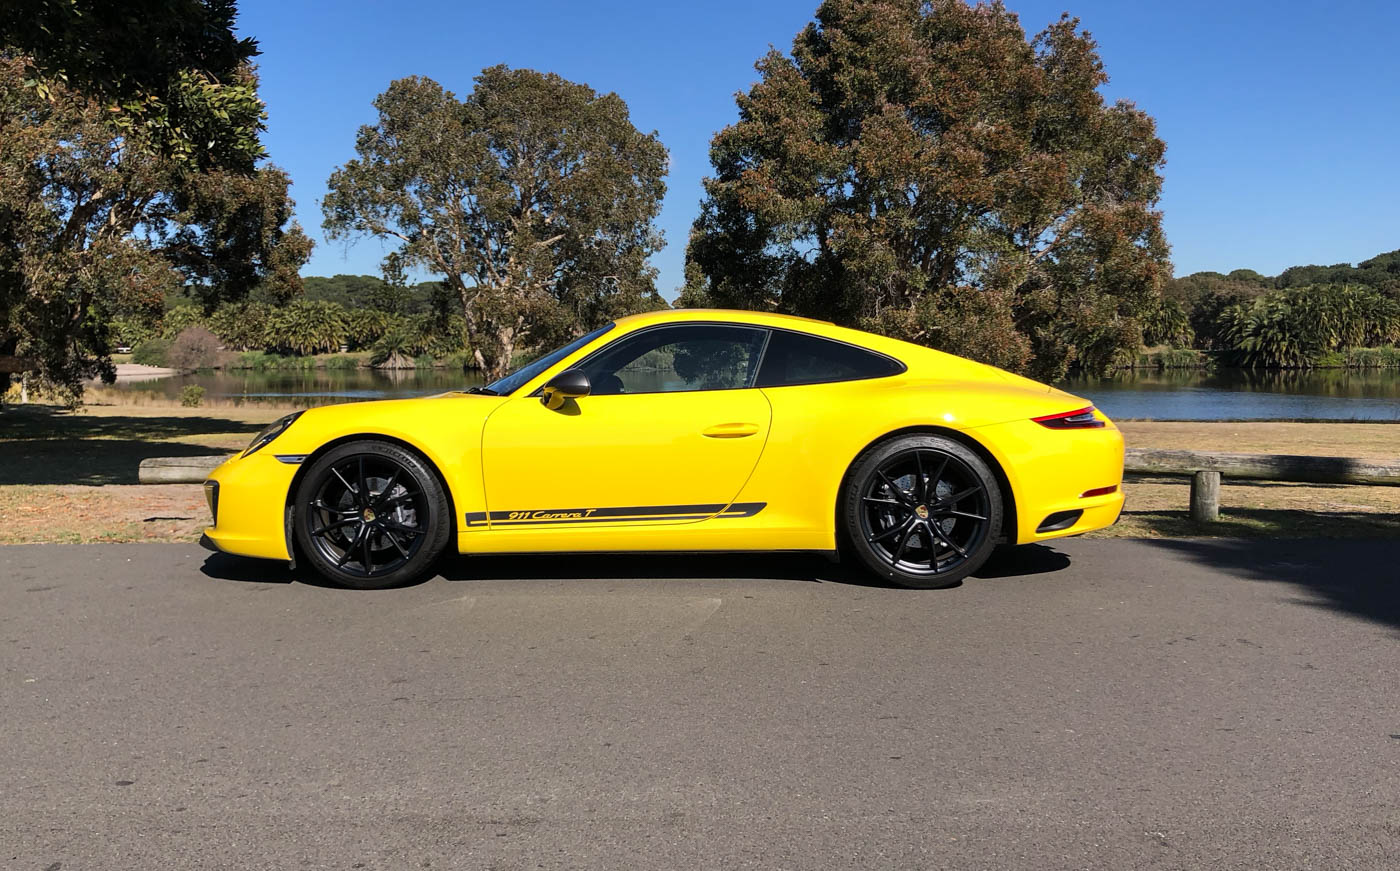 21 Things We Loved & Loathed About Porsche's $271,000 'Purist' Carrera T